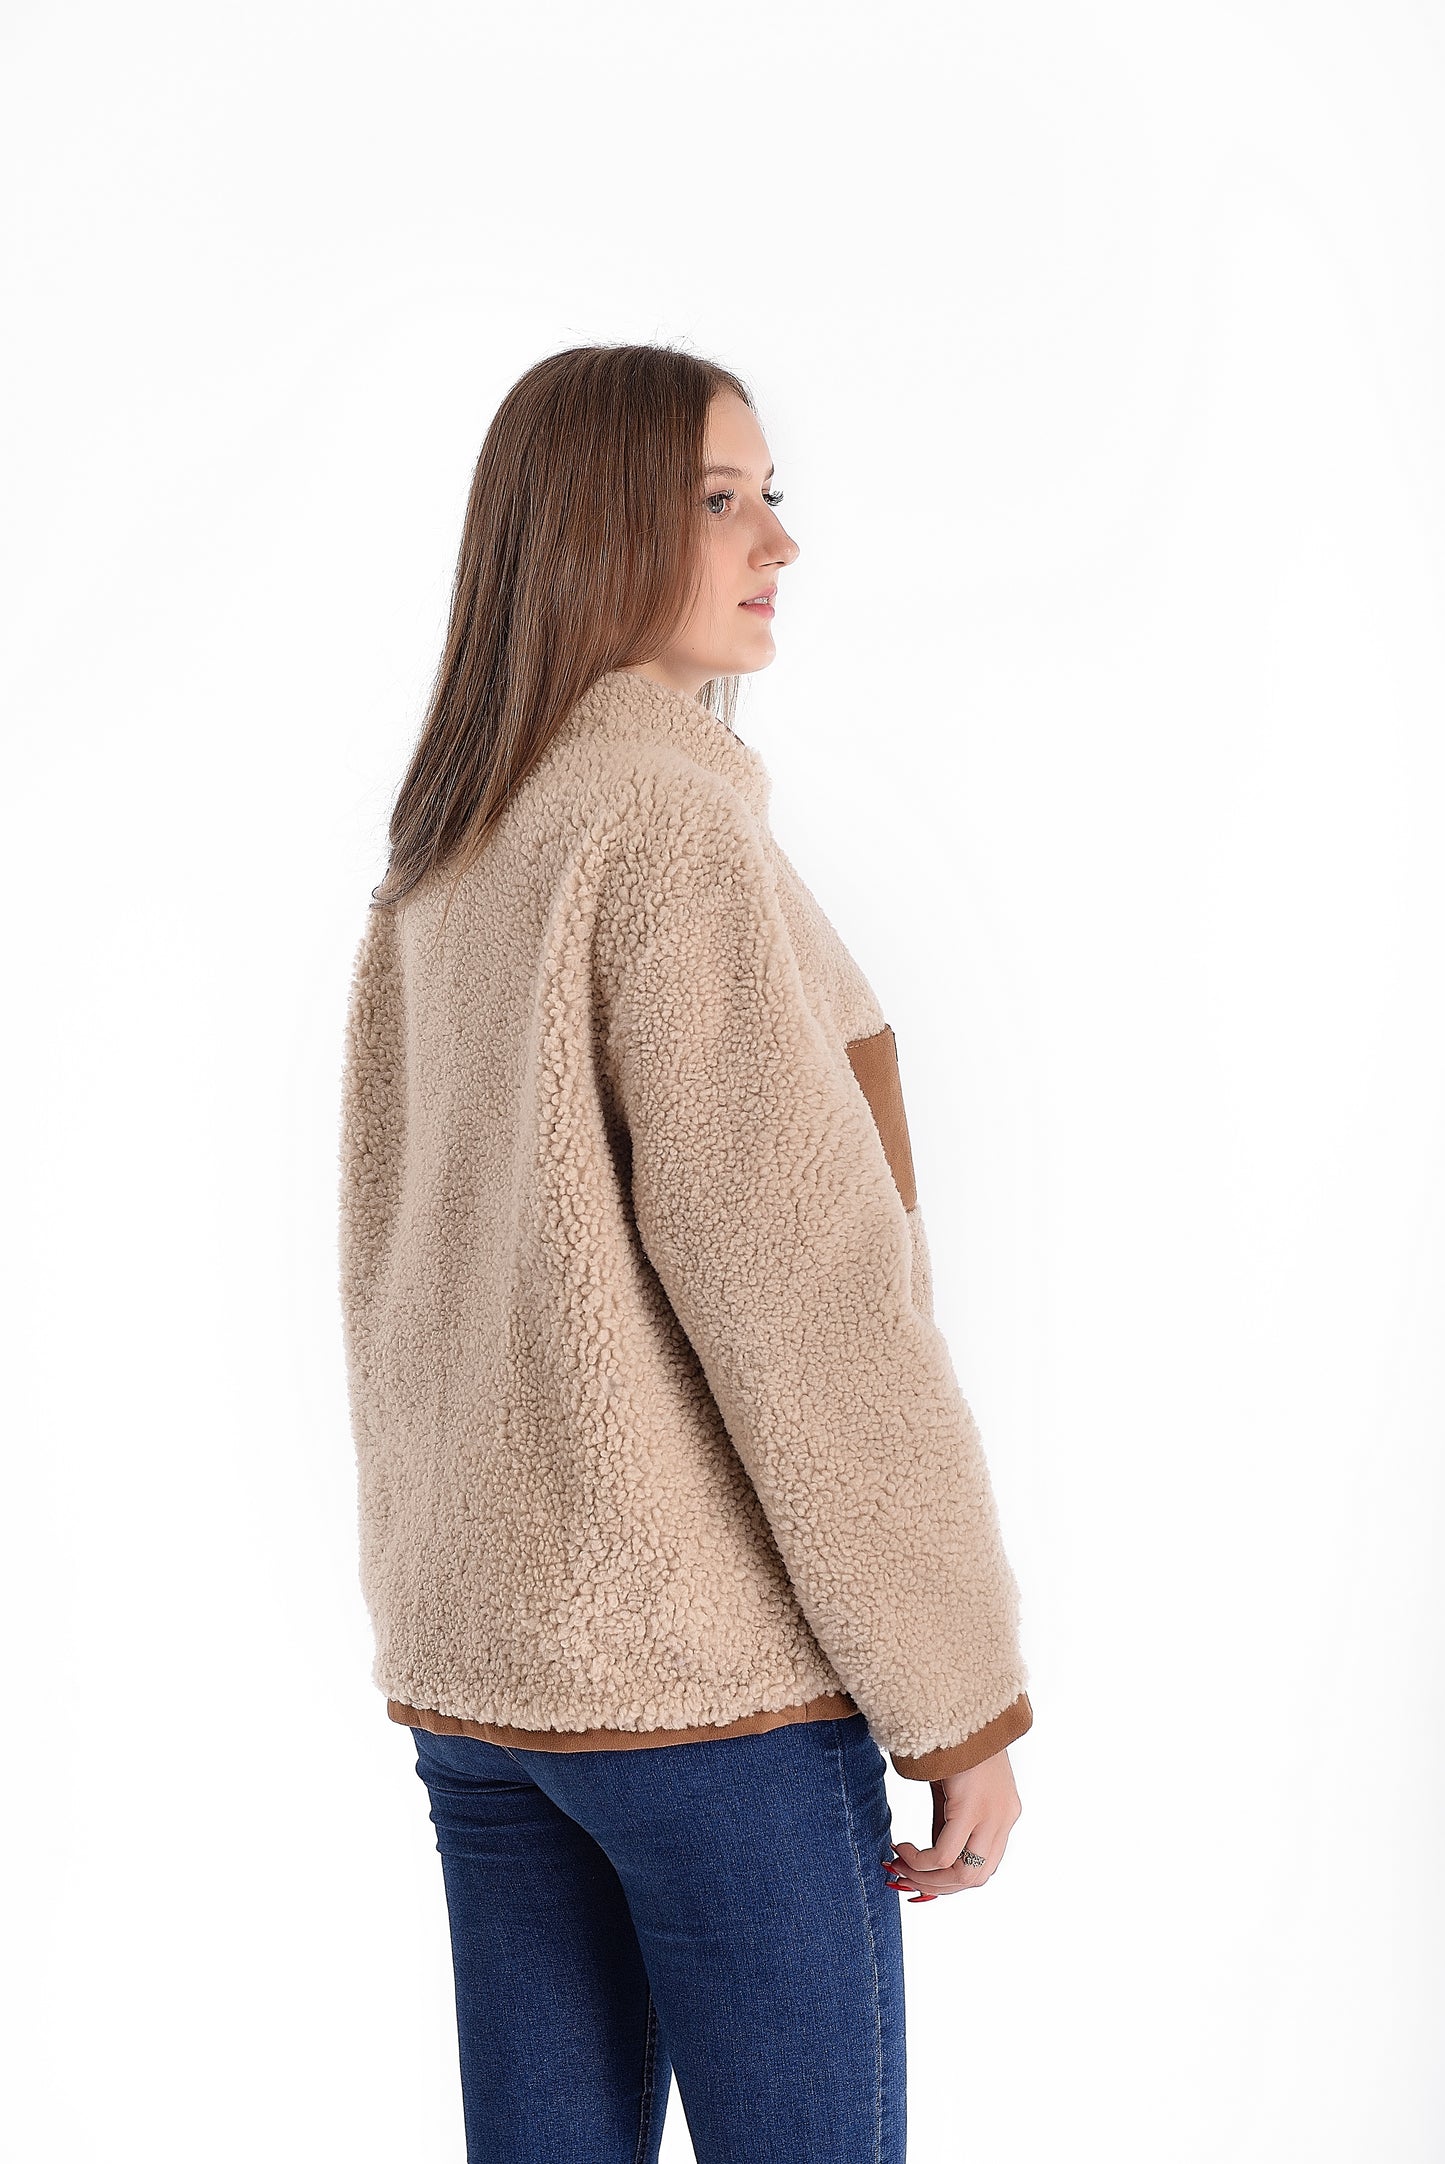 Lightweight Short Sheepskin Jacket in Beige Color with Boucle Sheepskin and Suede Leather Inserts